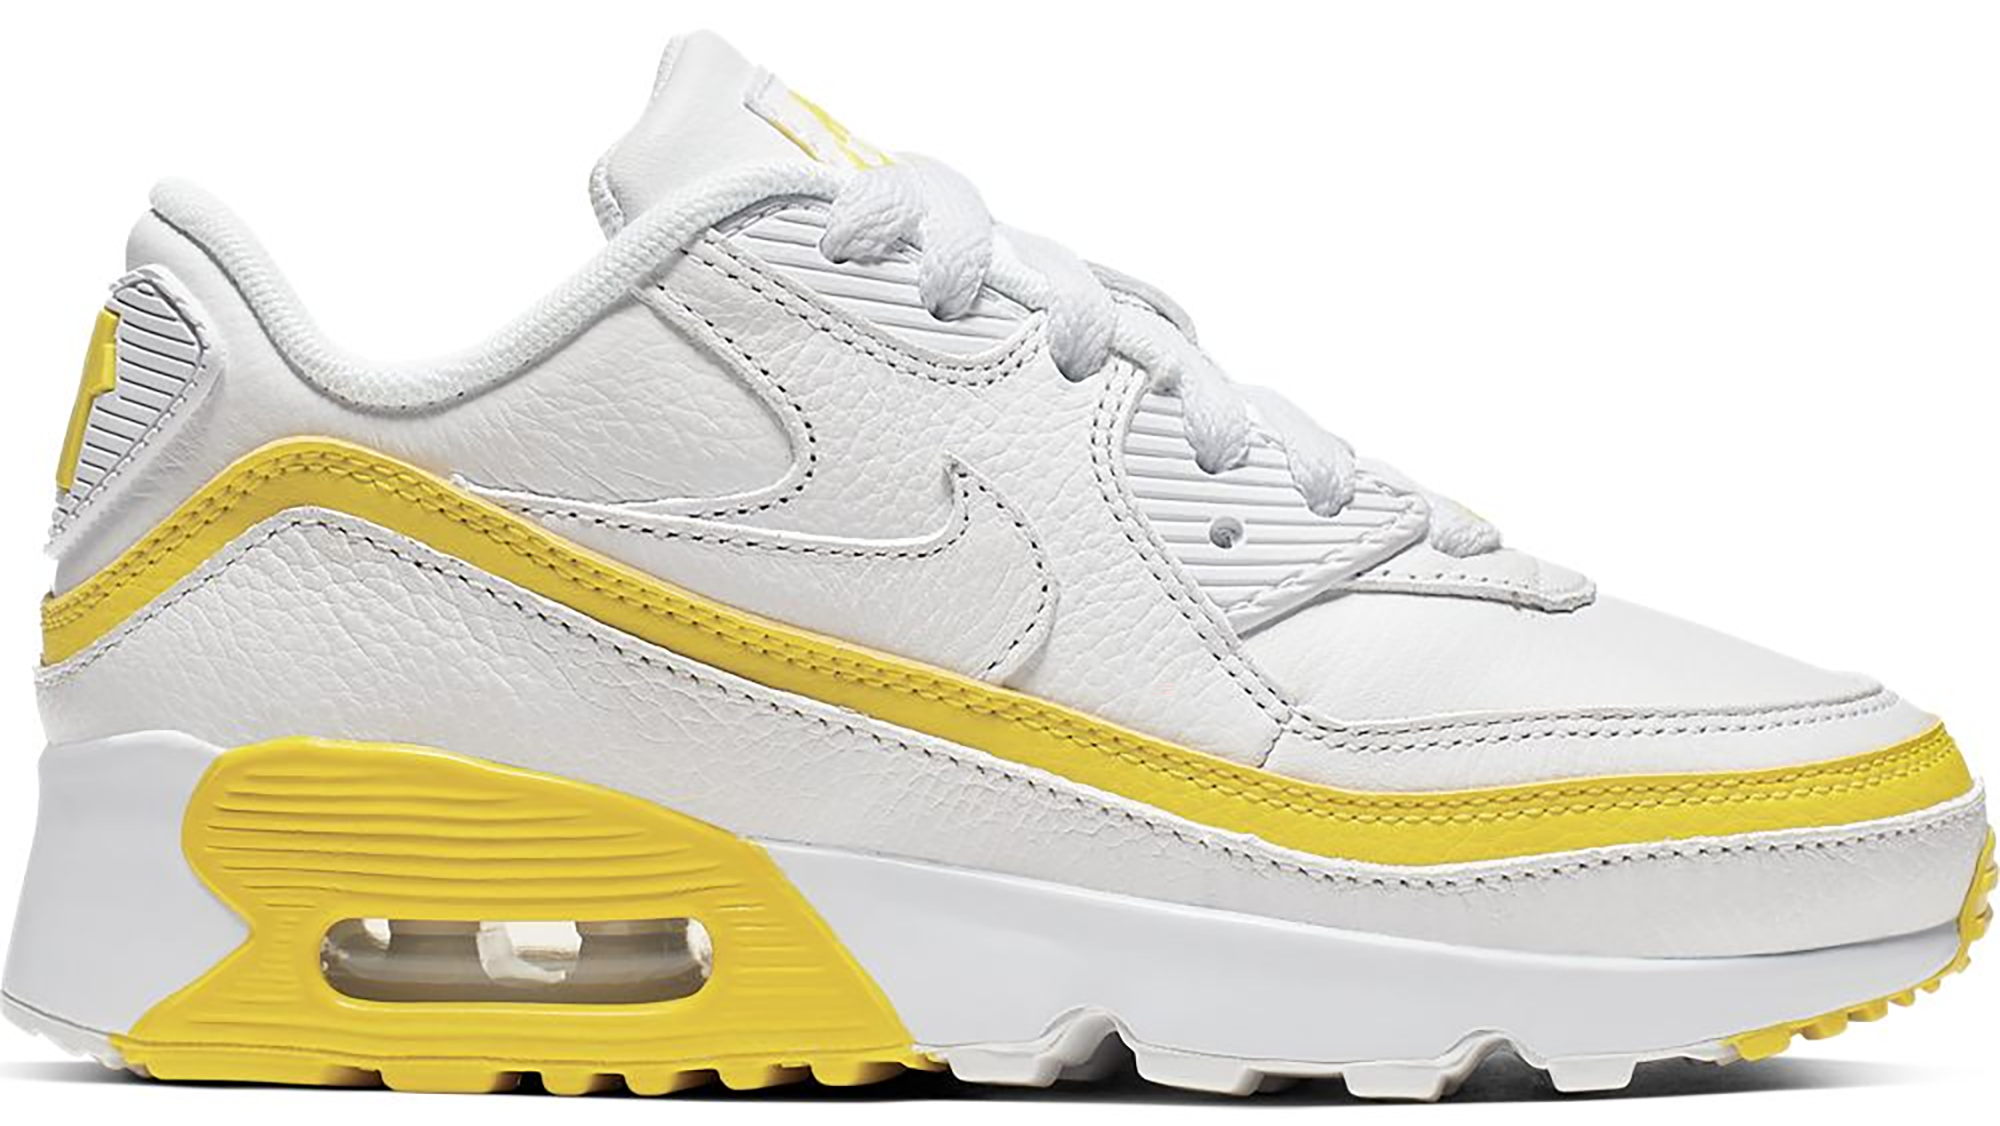 white and yellow air max